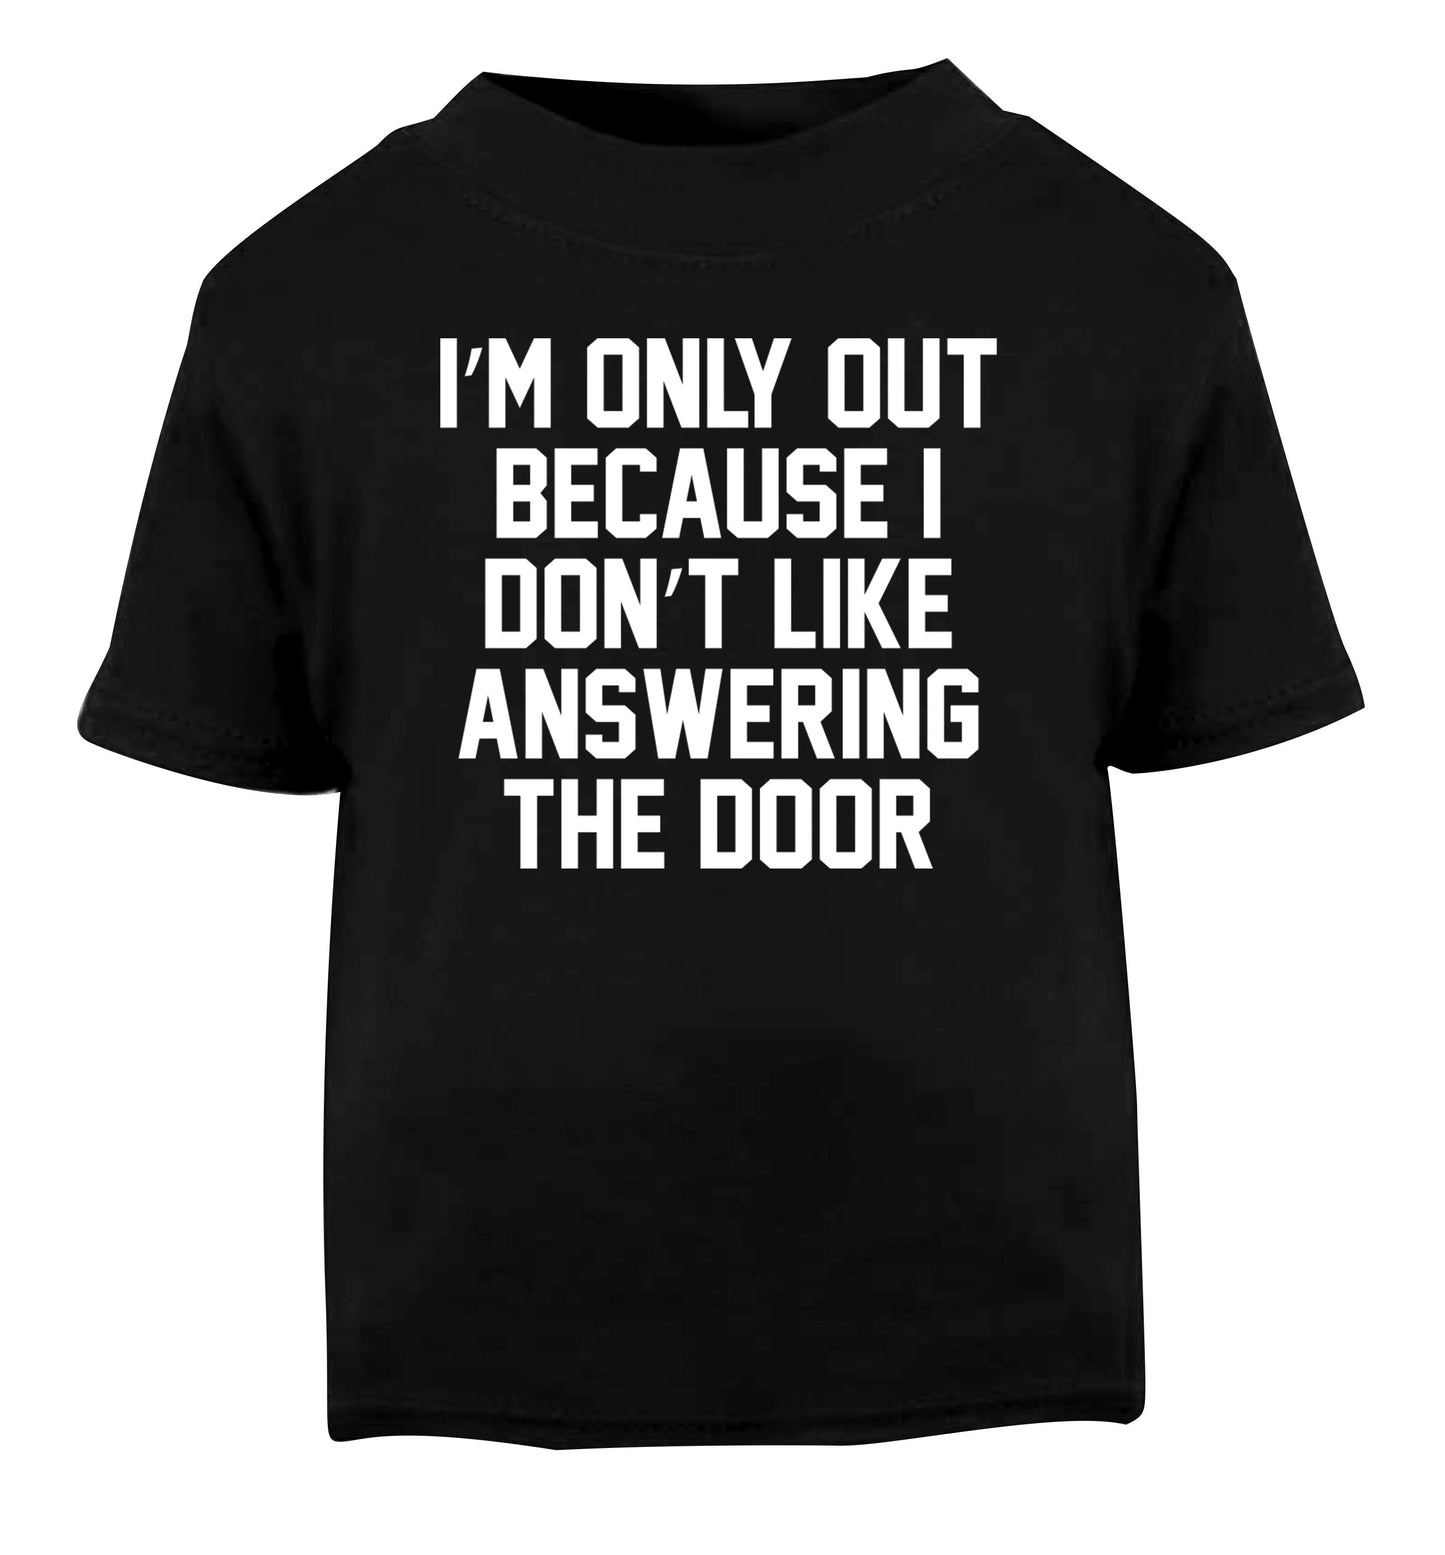 I'm only out because I don't like answering the door Black Baby Toddler Tshirt 2 years